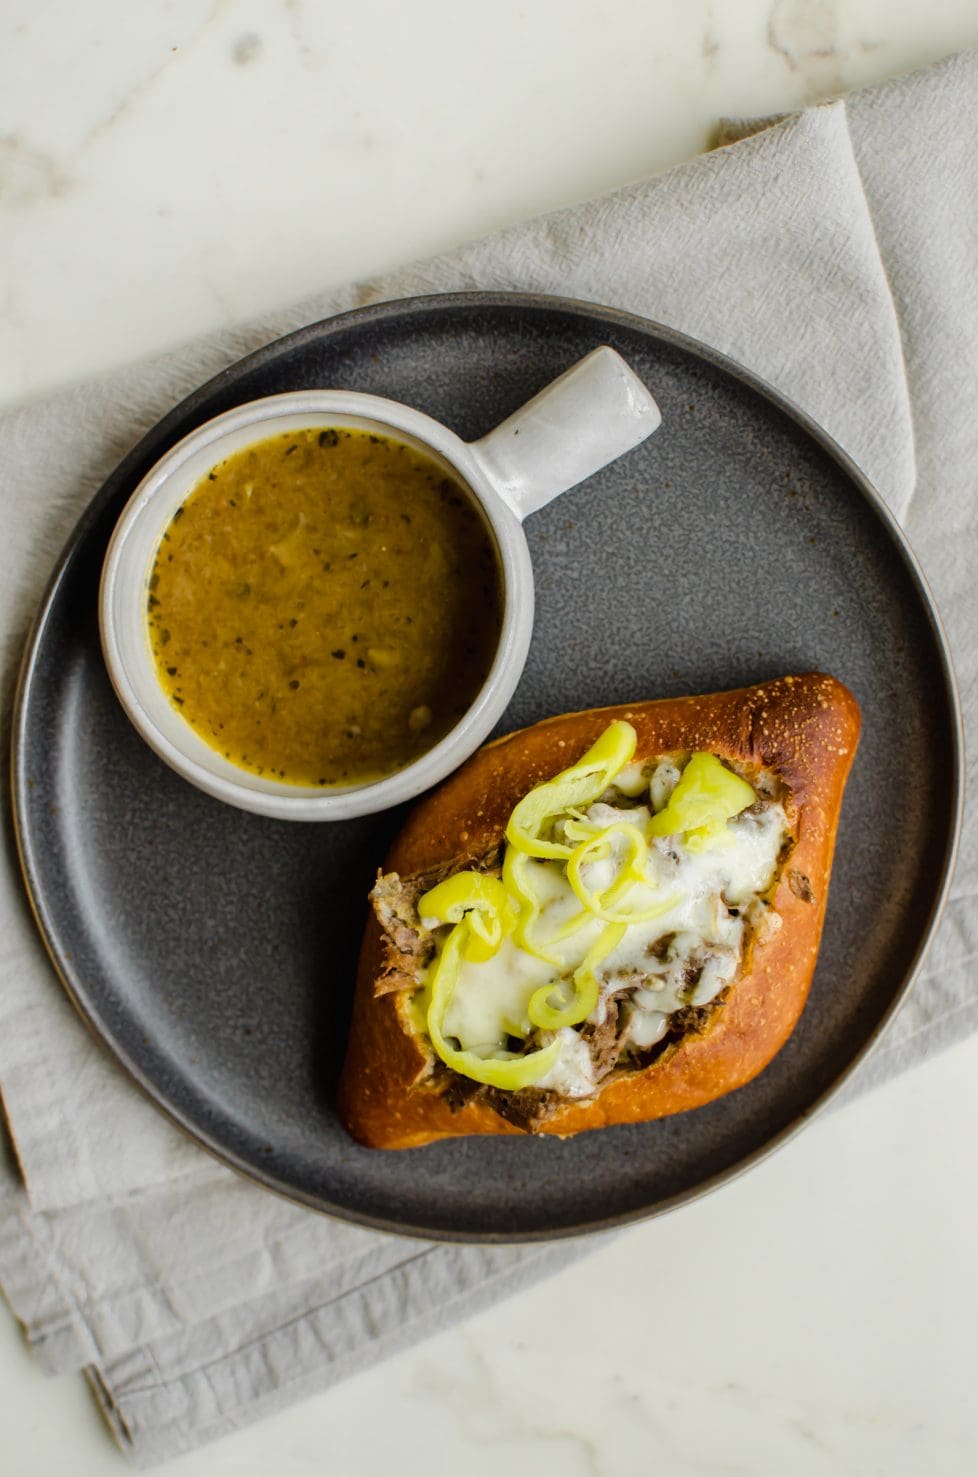 Italian beef sandwich on a plate next to dipping sauce.